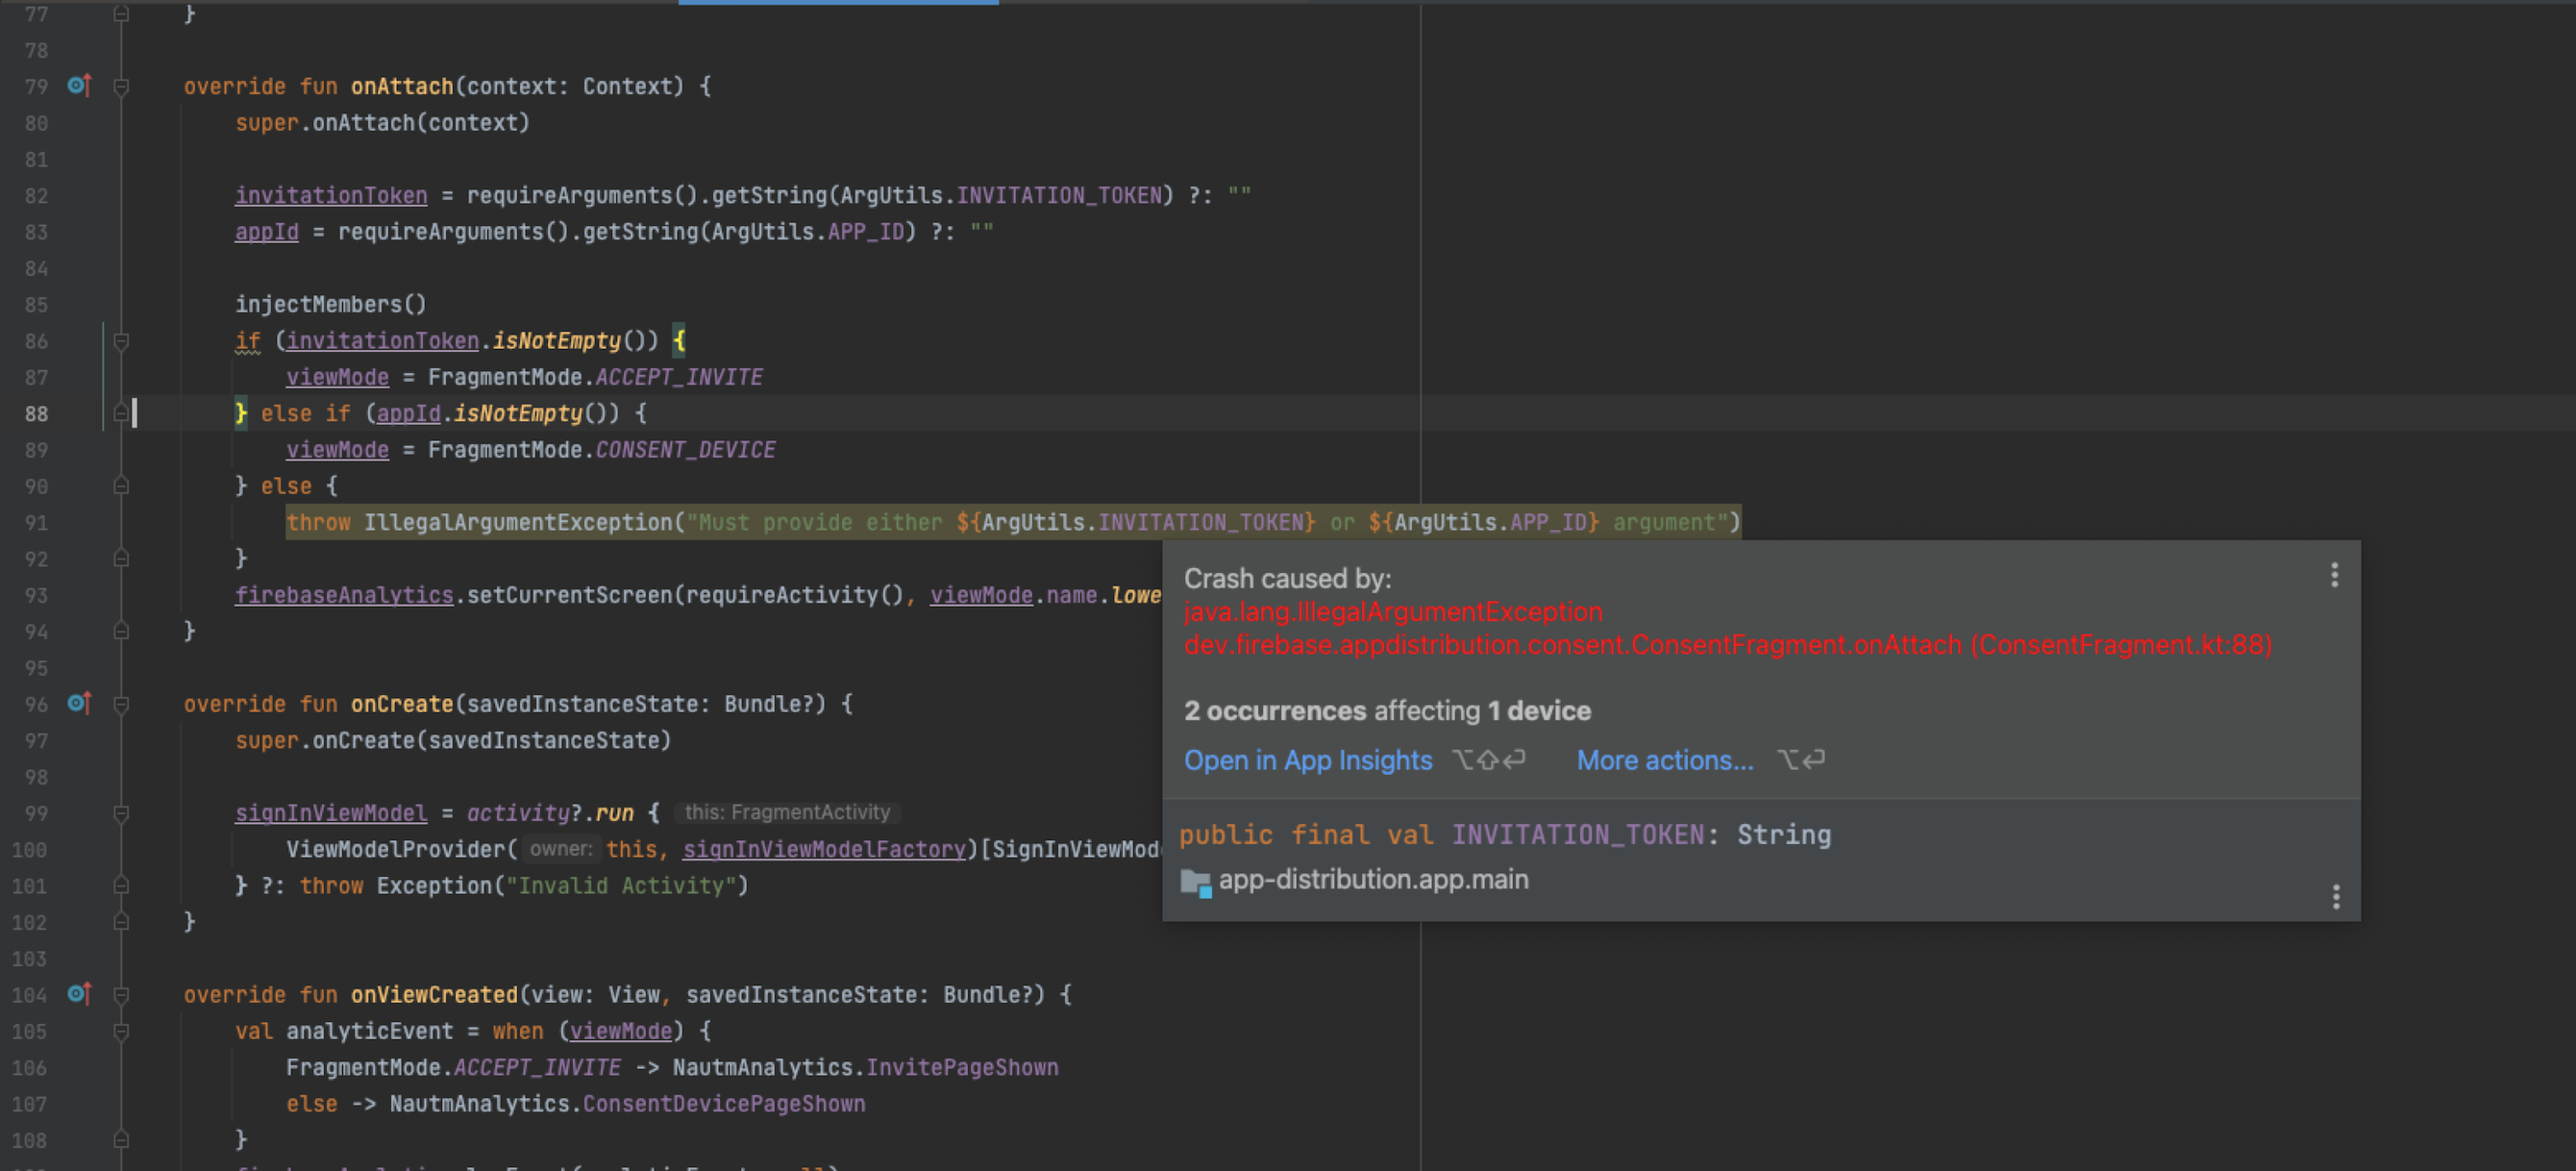 Crash-related code highlighted in the IDE